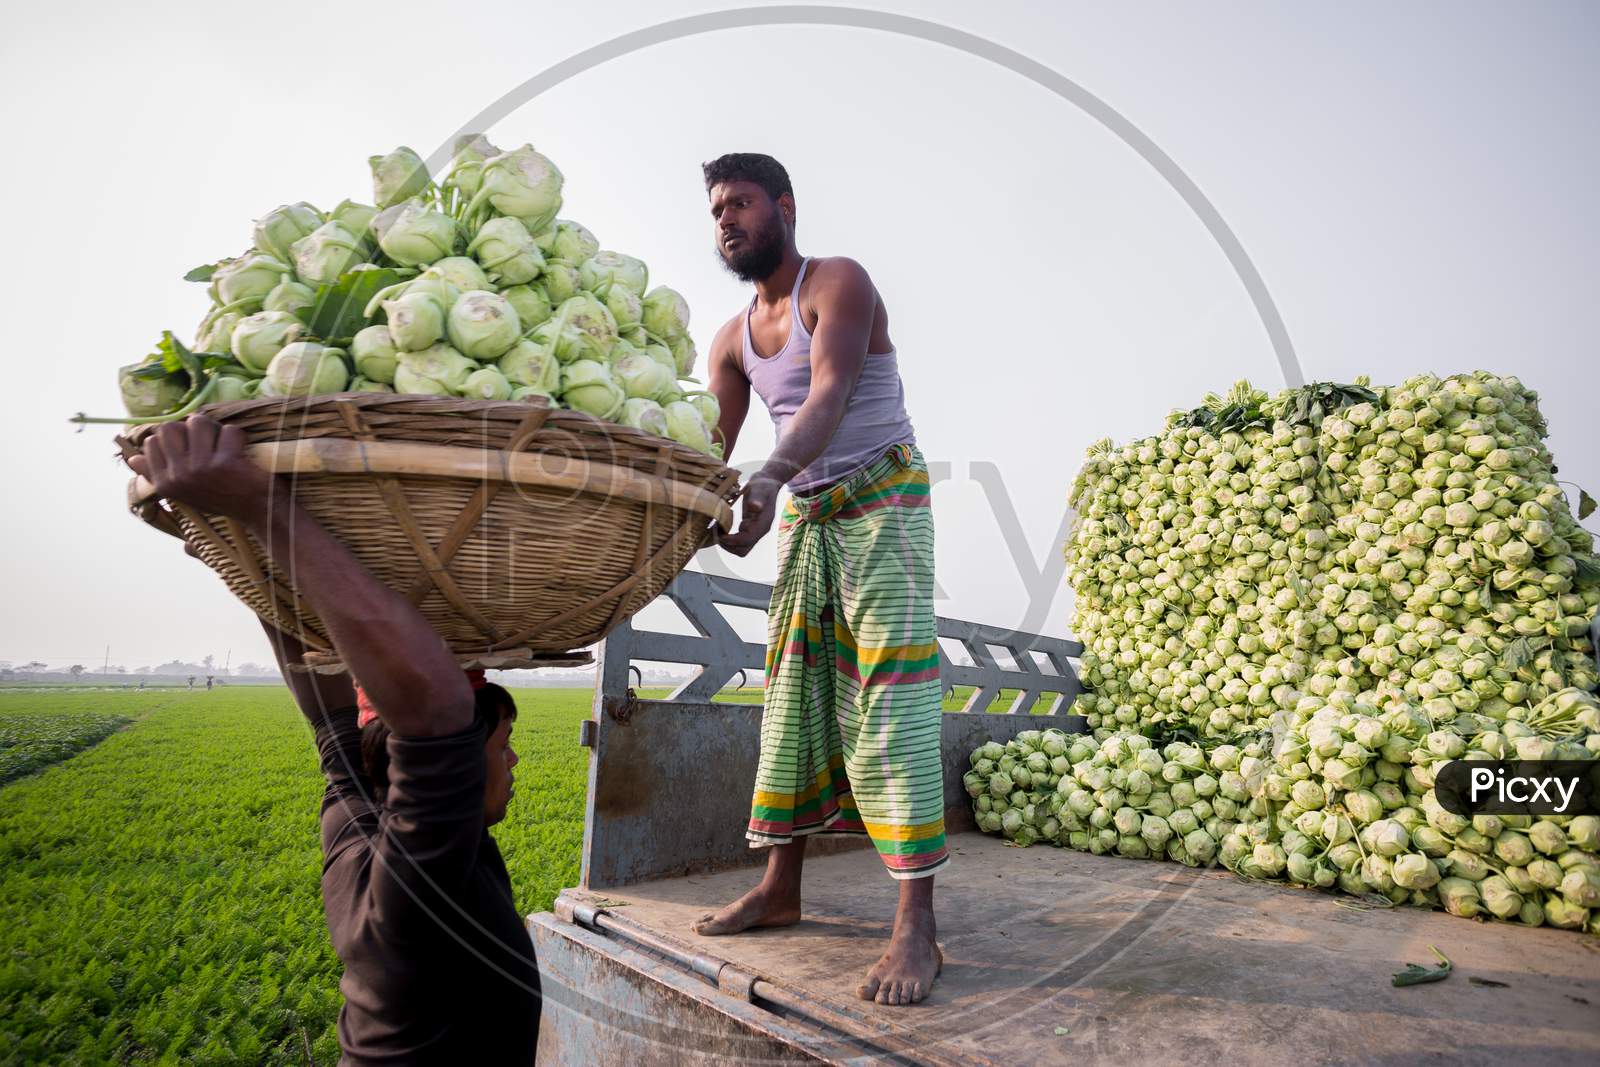 Bangladesh – January 24, 2020: Labors Are Uploading Turnip In Picked Up The Truck For Export In Local Market At Savar, Dhaka, Bangladesh.